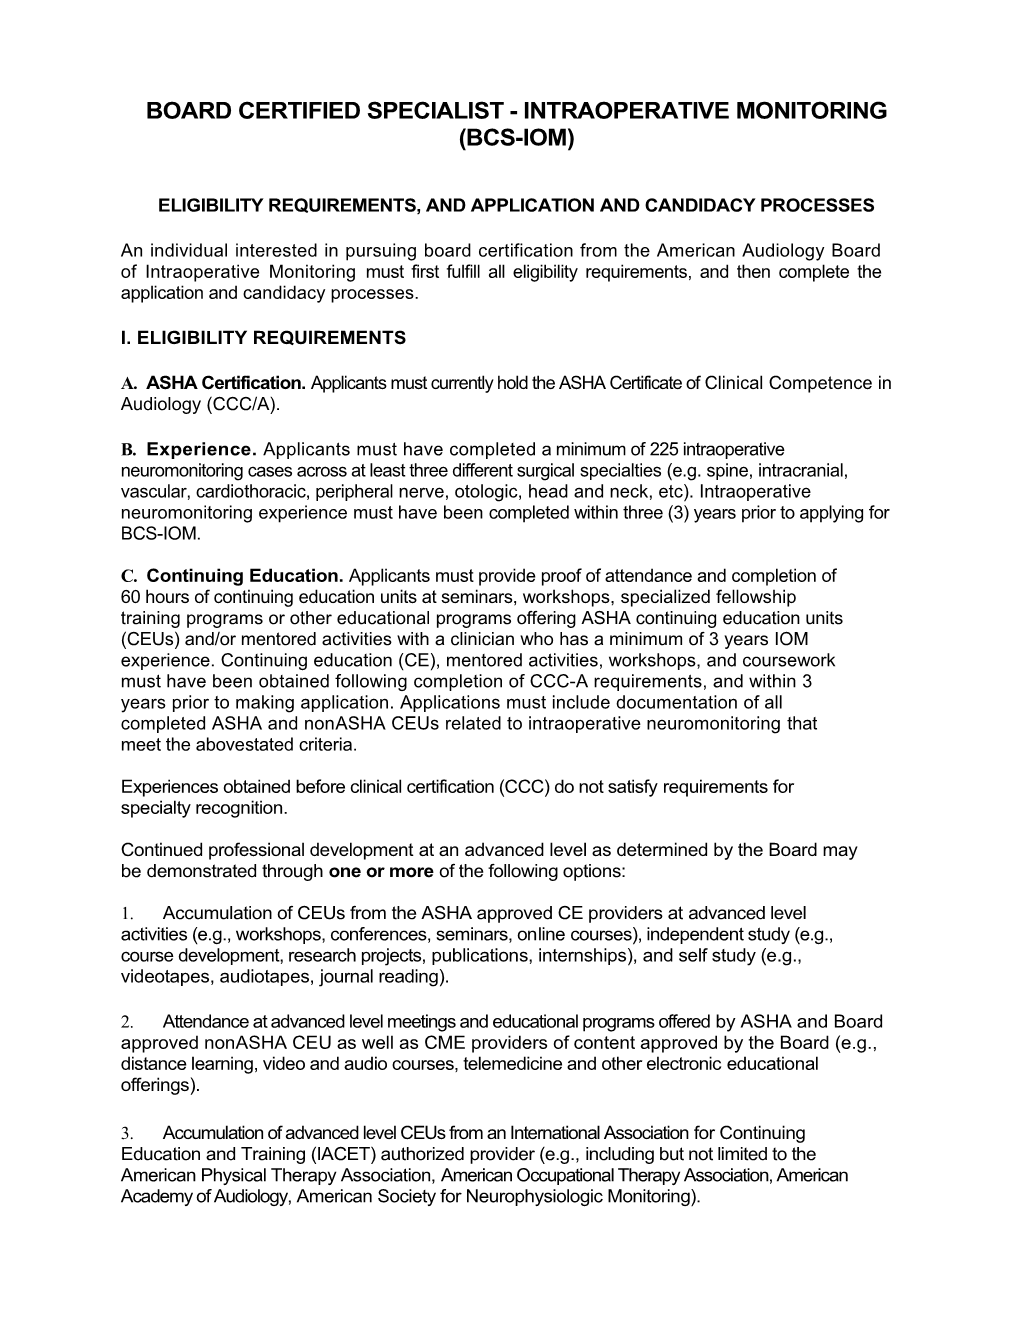 Eligibility Requirements,Andapplication and Candidacy Processes